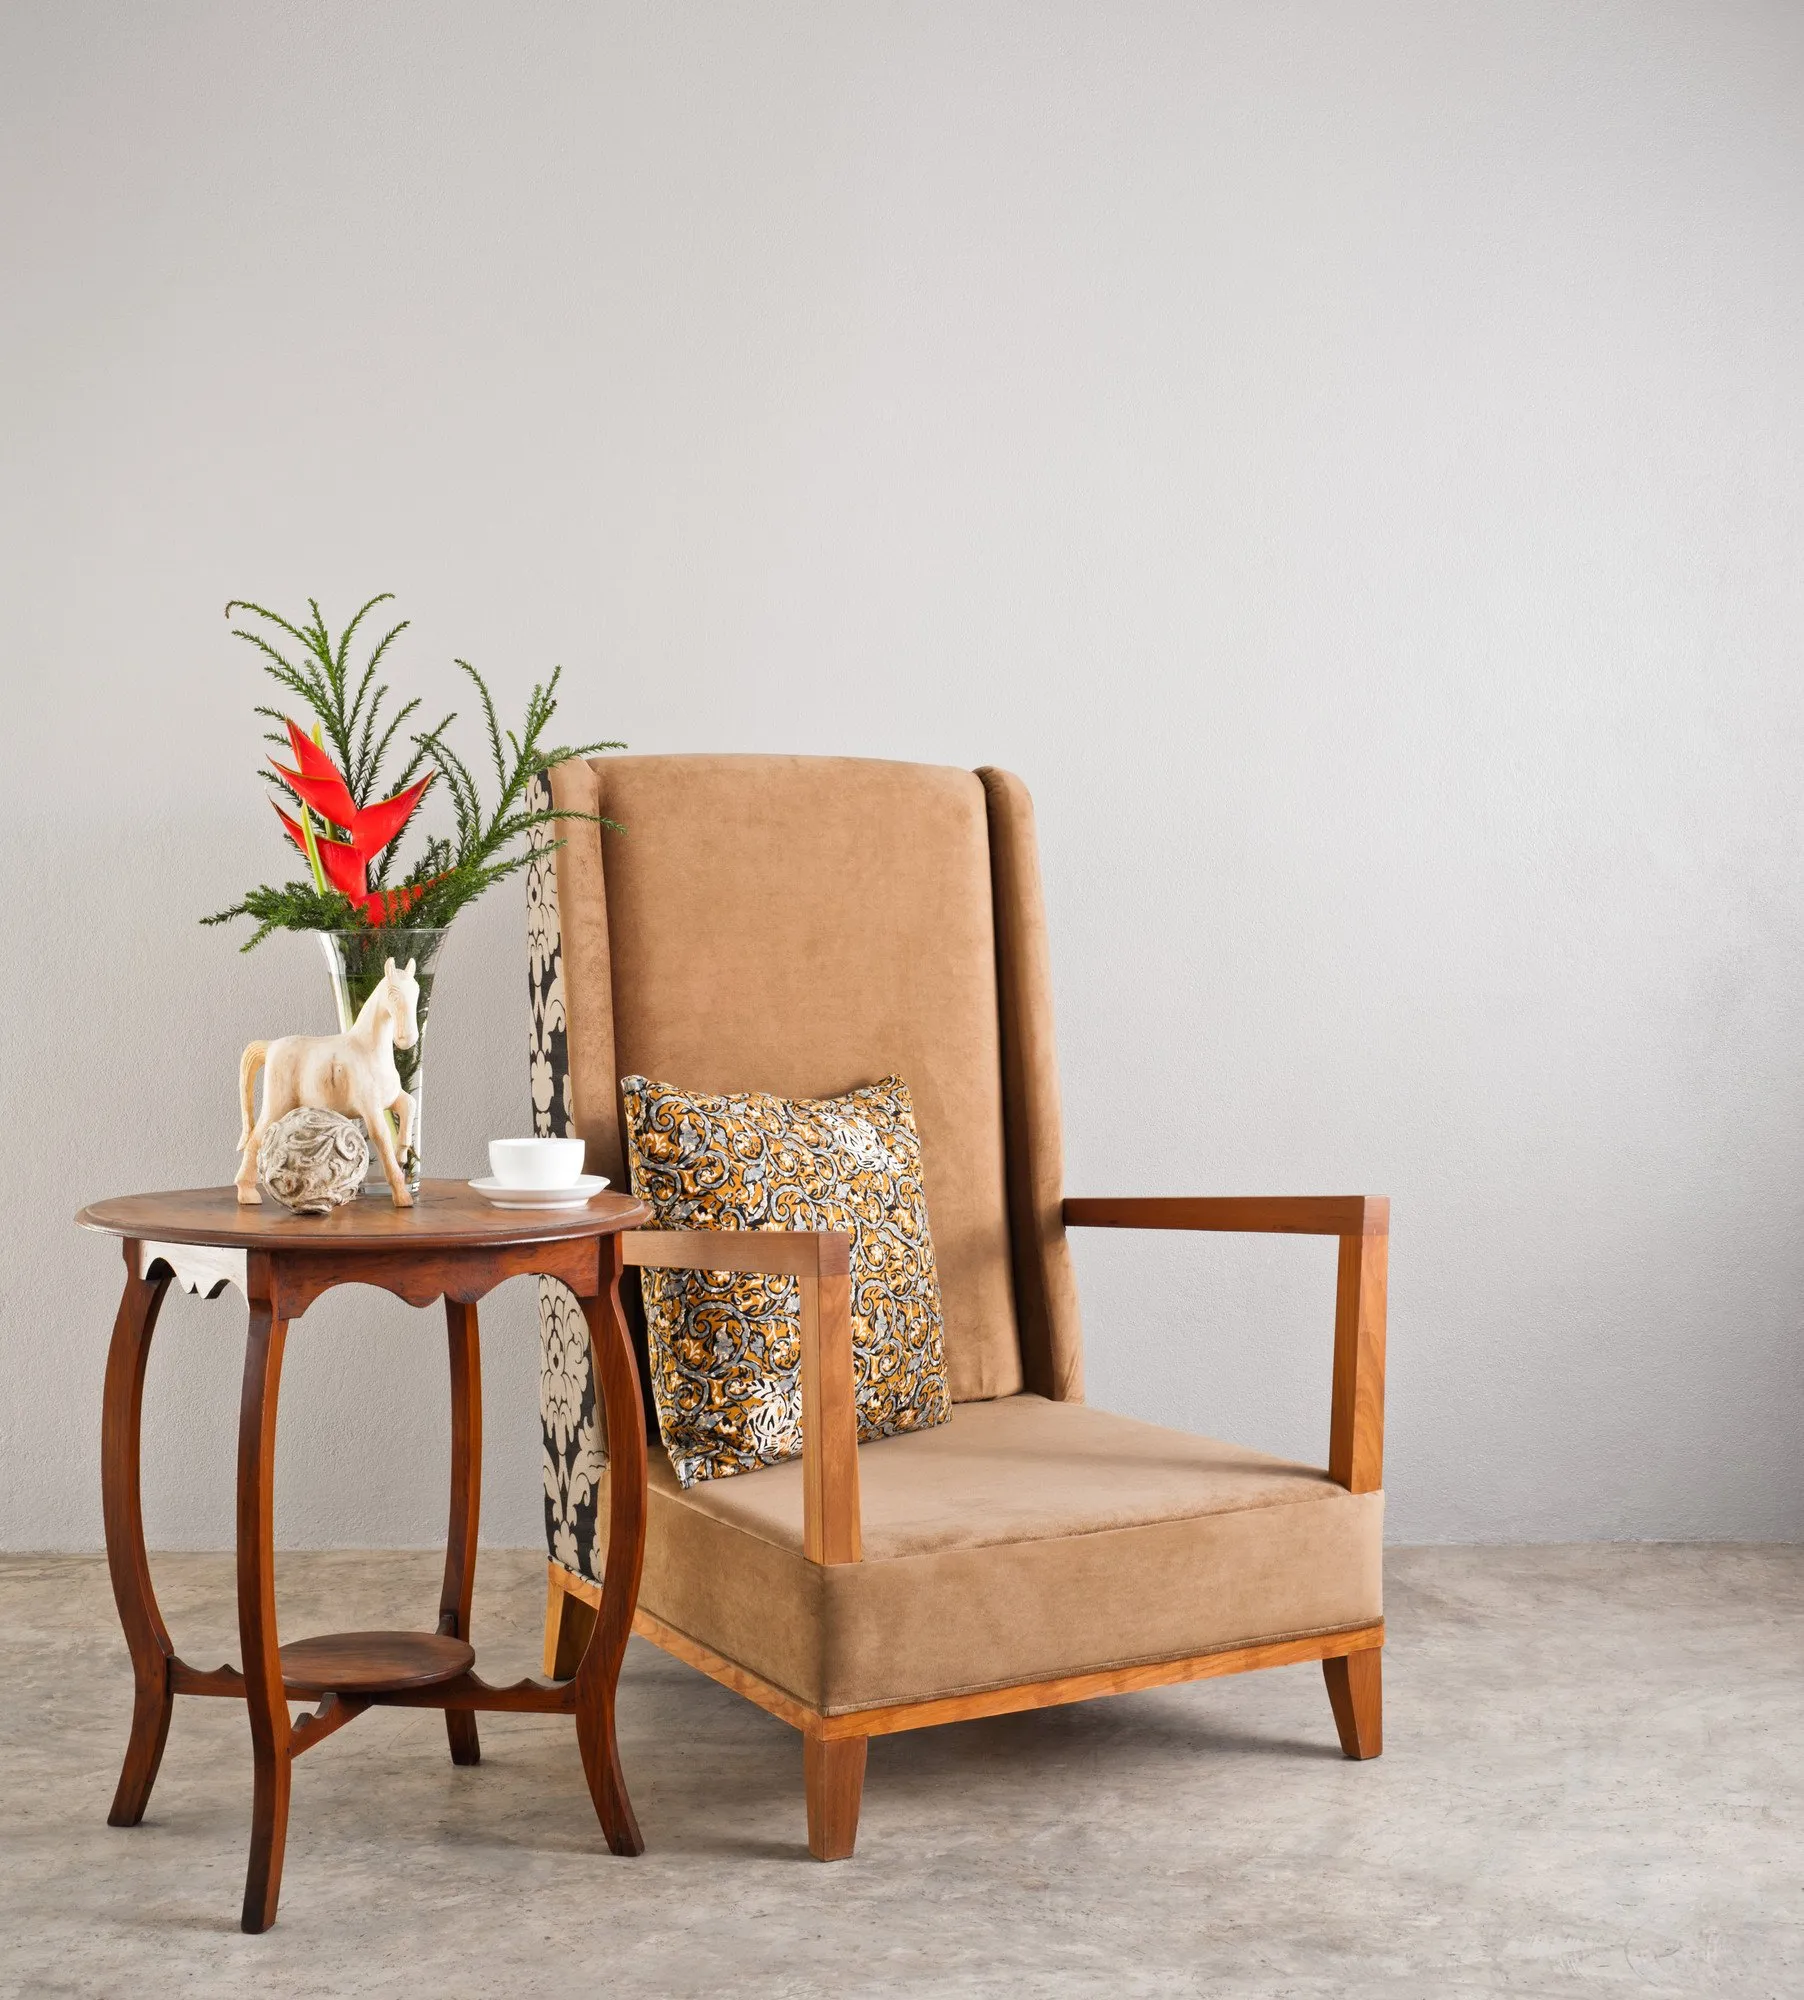 Three Reasons to Reupholster Your Furniture